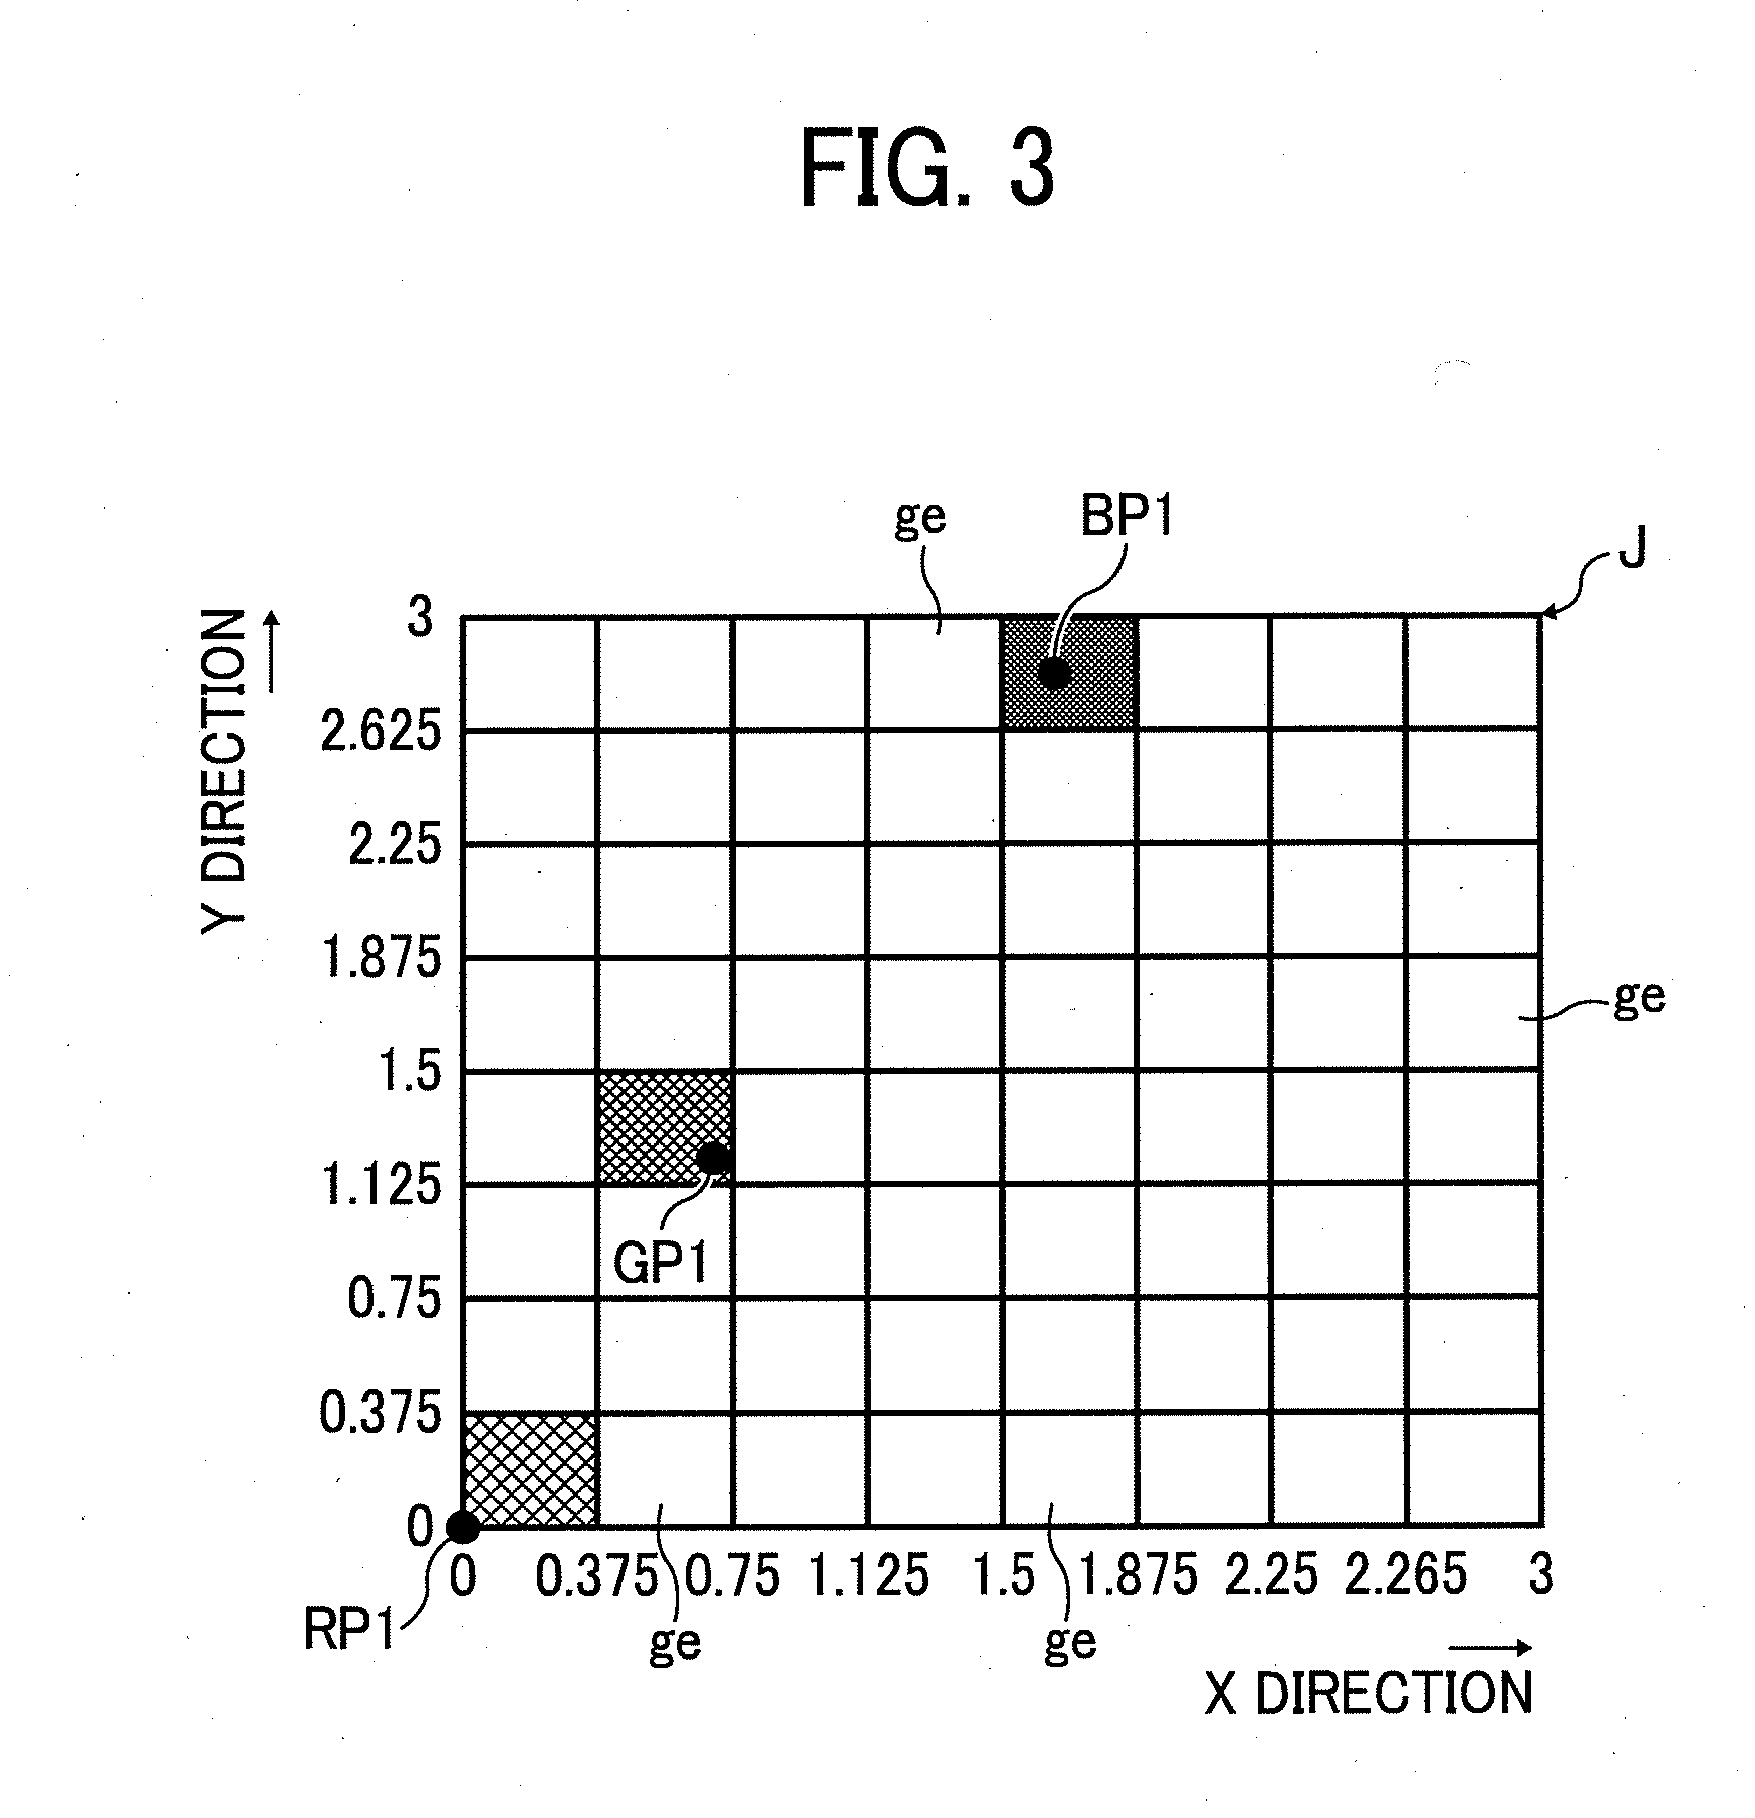 Projection-type image displaying apparatus